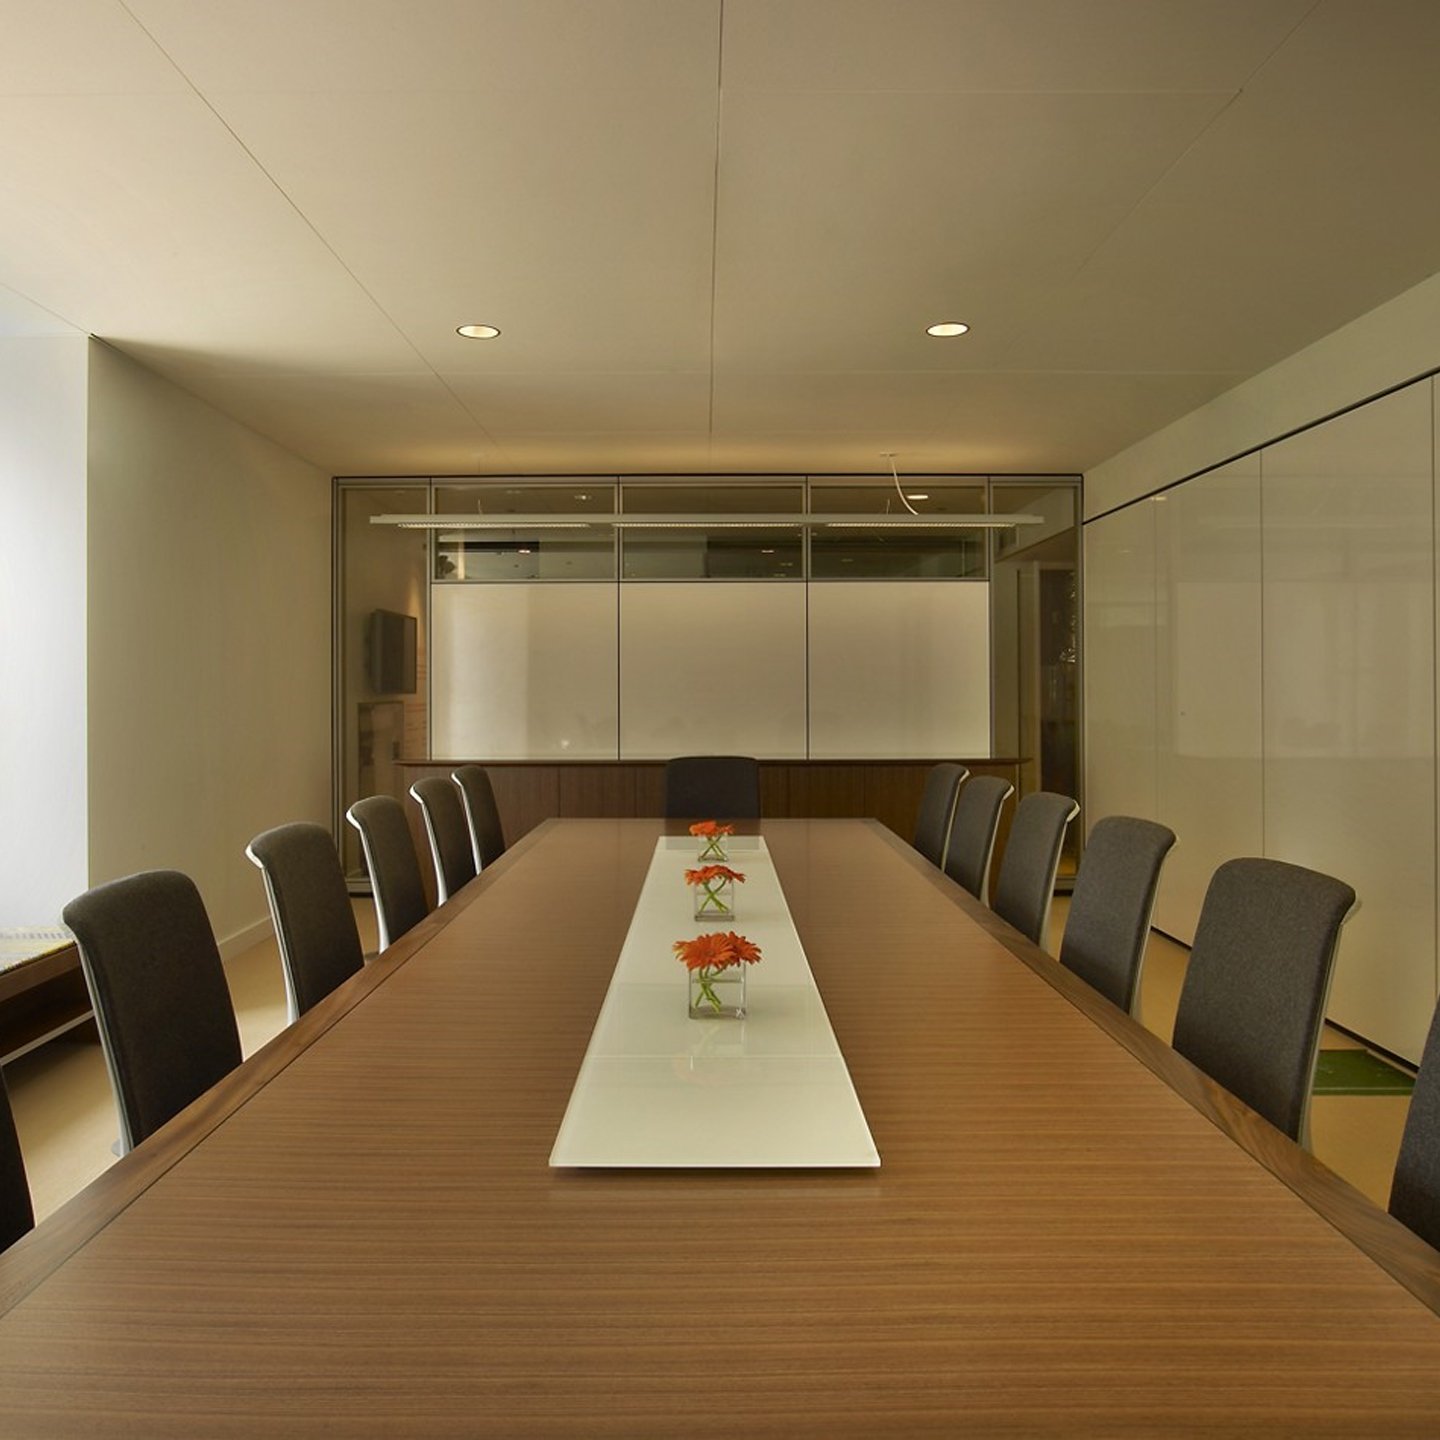 Haworth Wood Conference table in conference room with glass walls and flower centerpeice